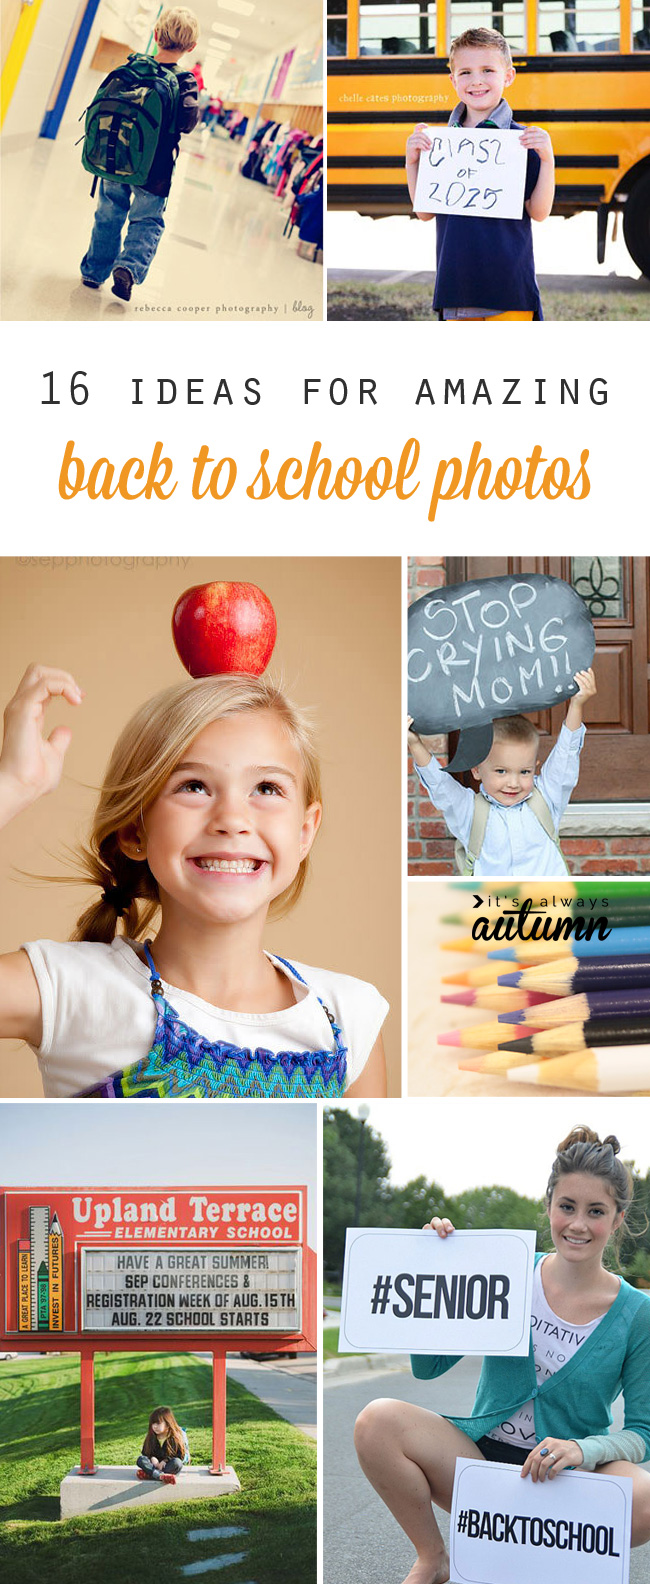 great tips and ideas for first day of school pictures or a back to school photoshoot. I want to try some of these this year!